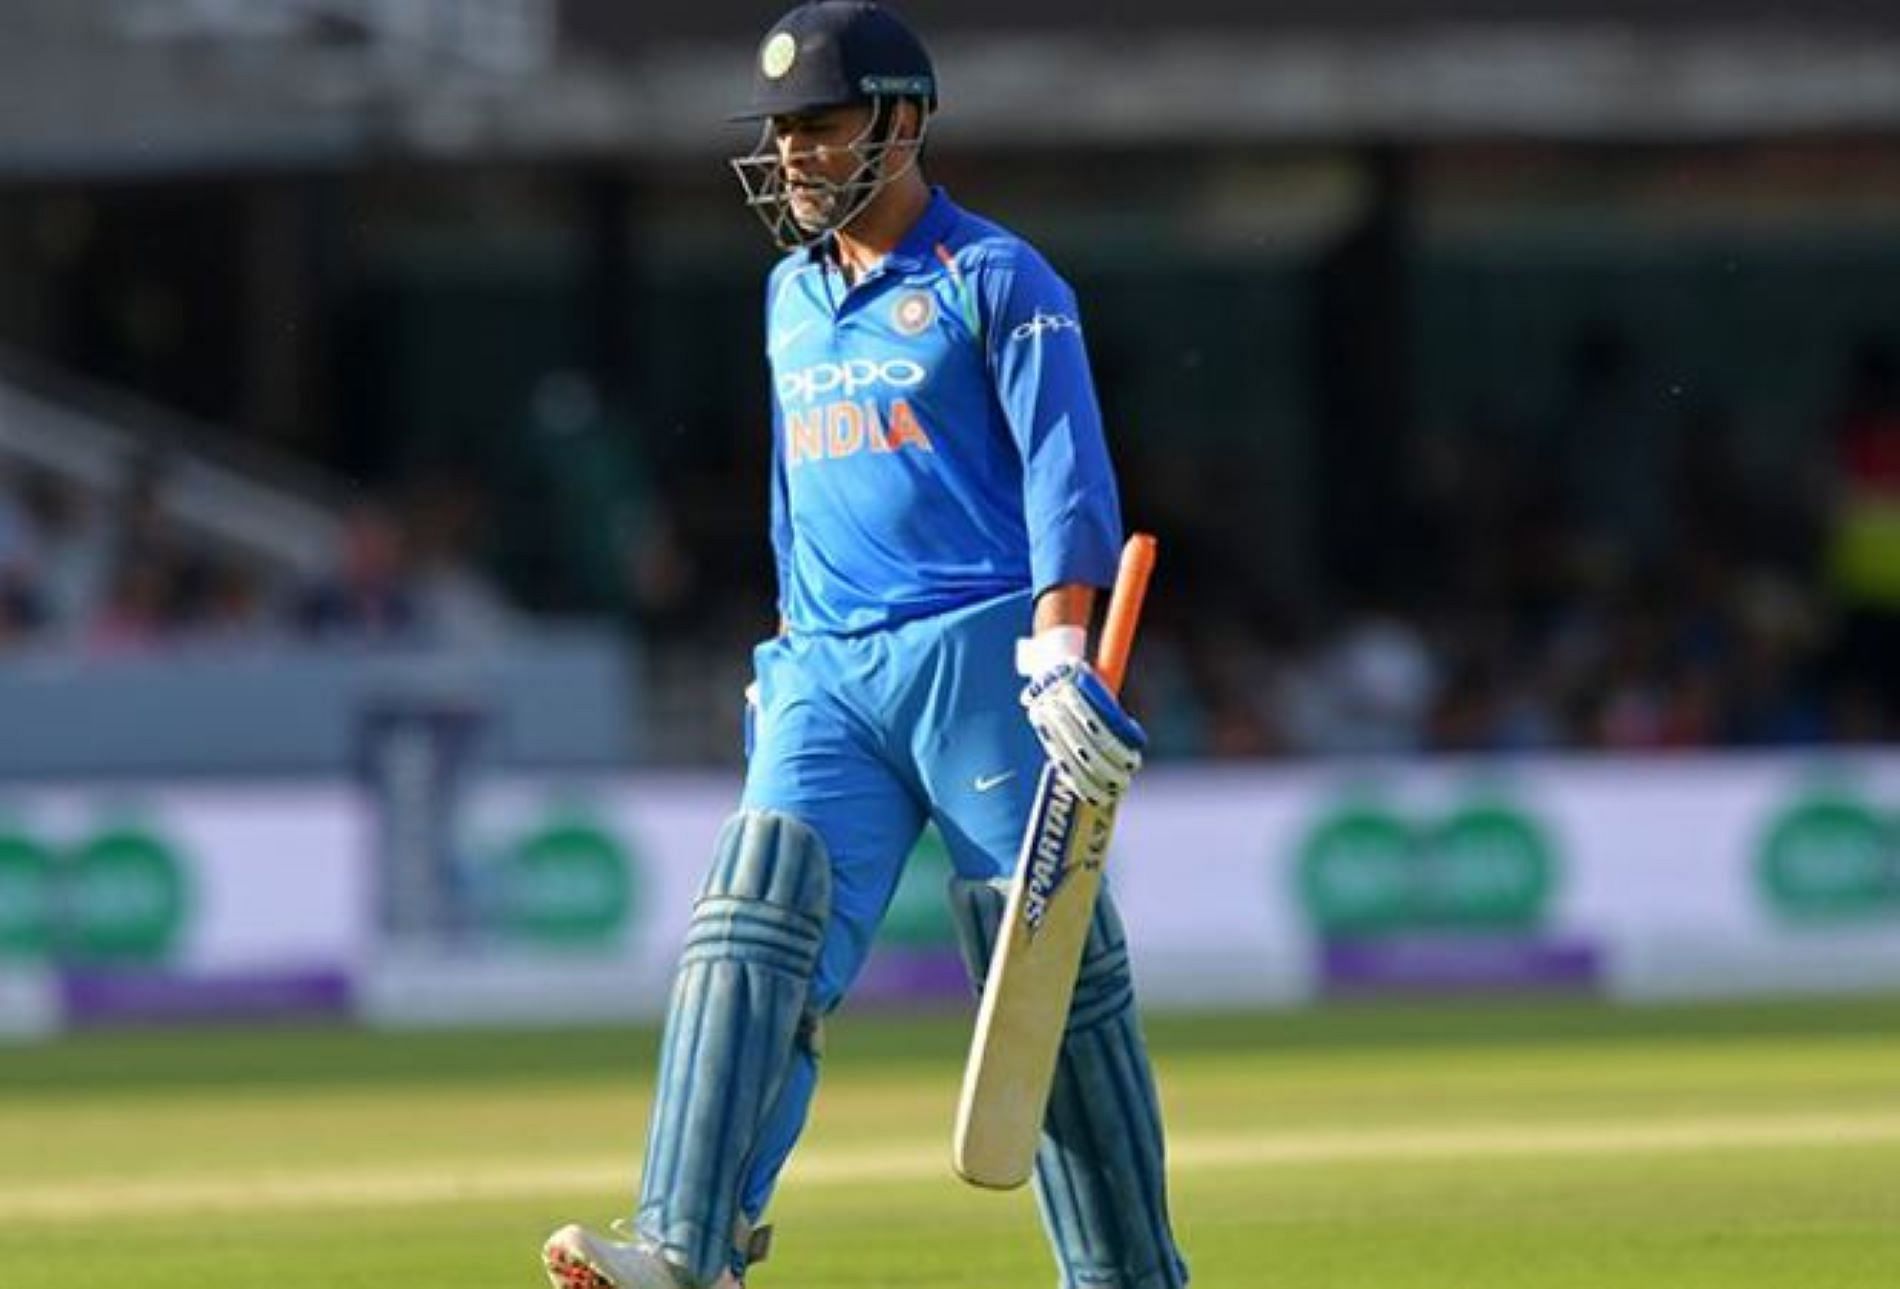 MS Dhoni had a dismal beginning with the bat in World Cups